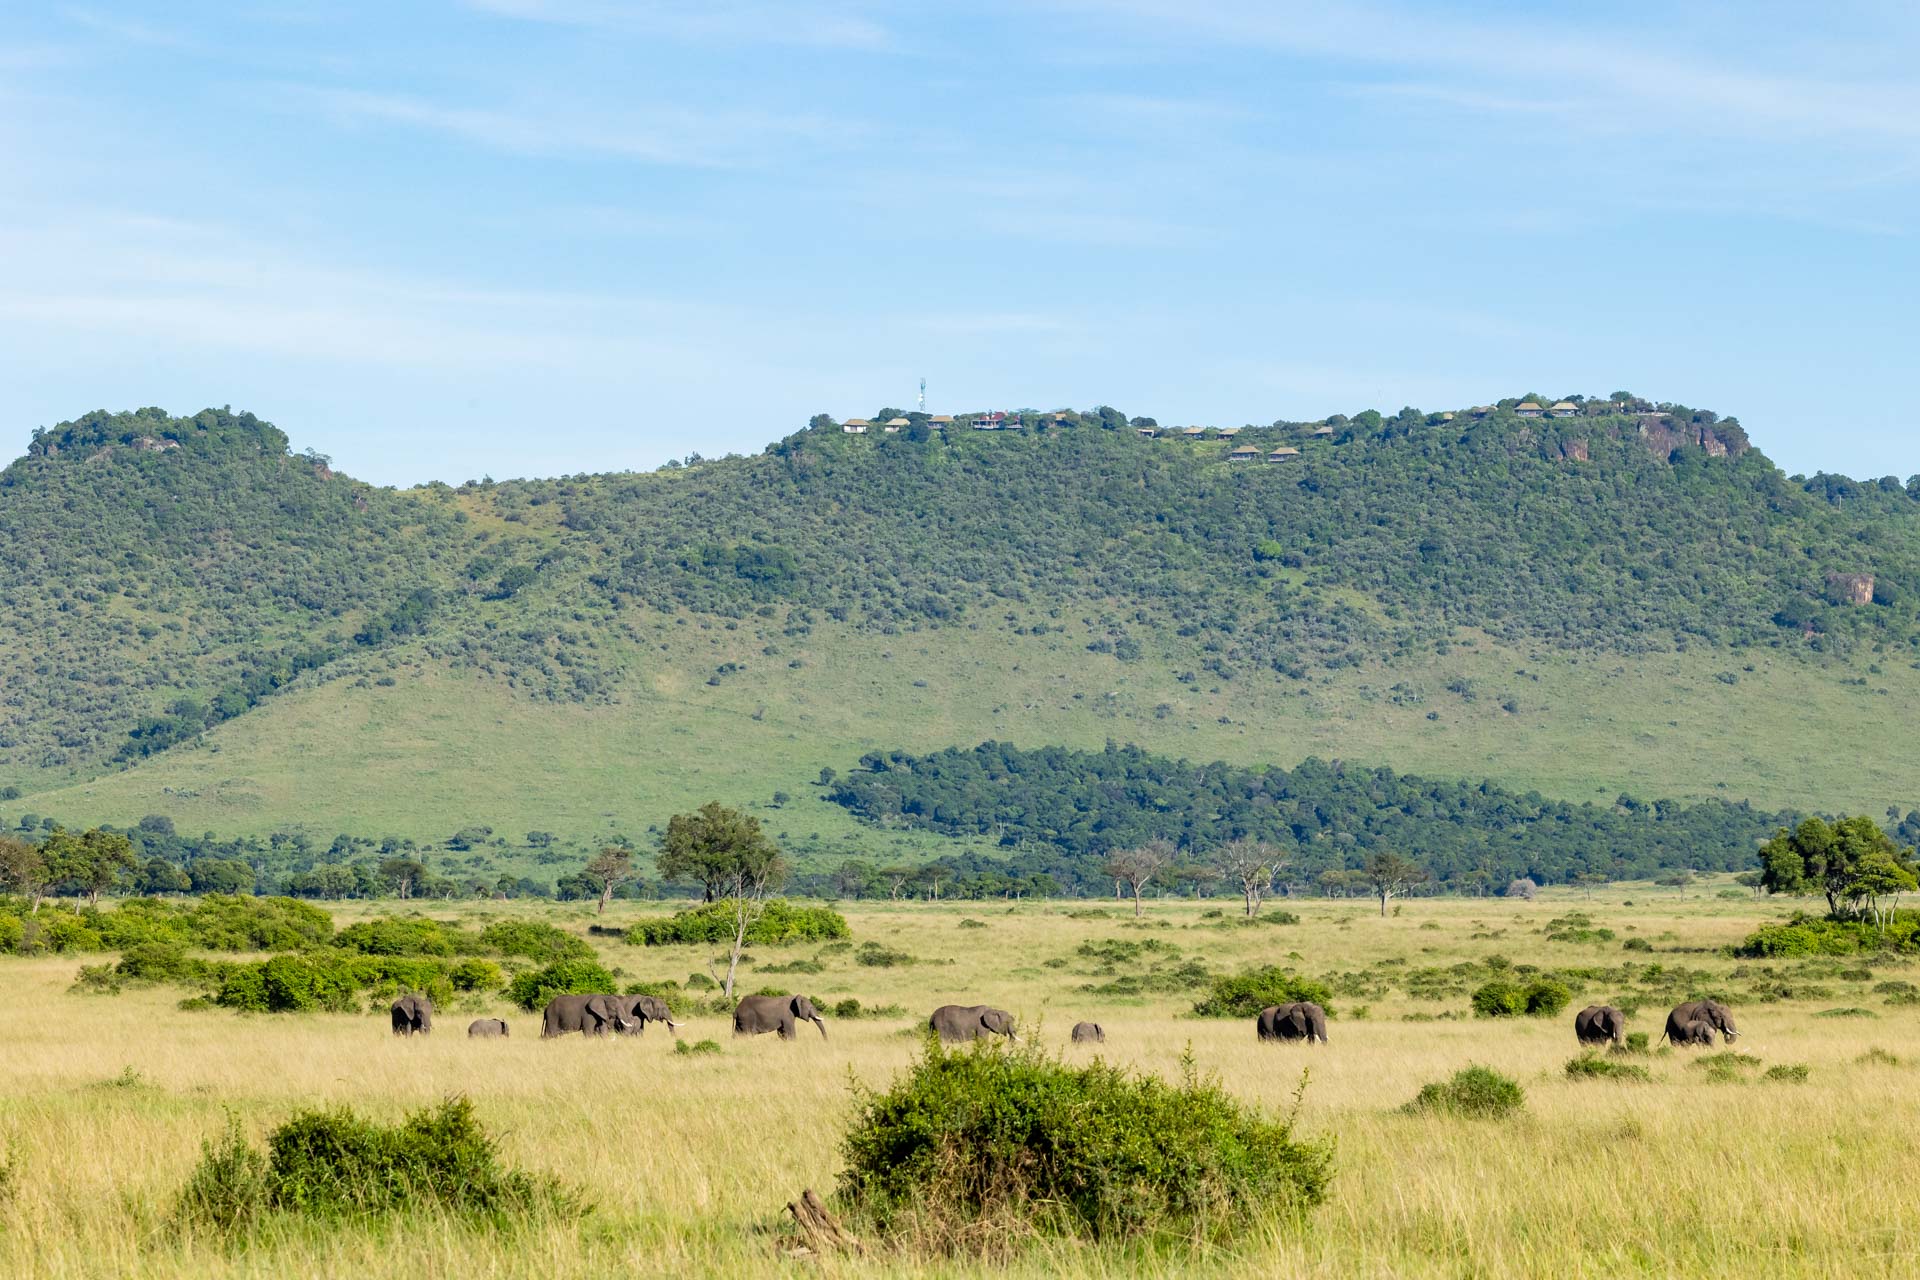 A herd of elephants gets lost in the long grass below Angama Mara